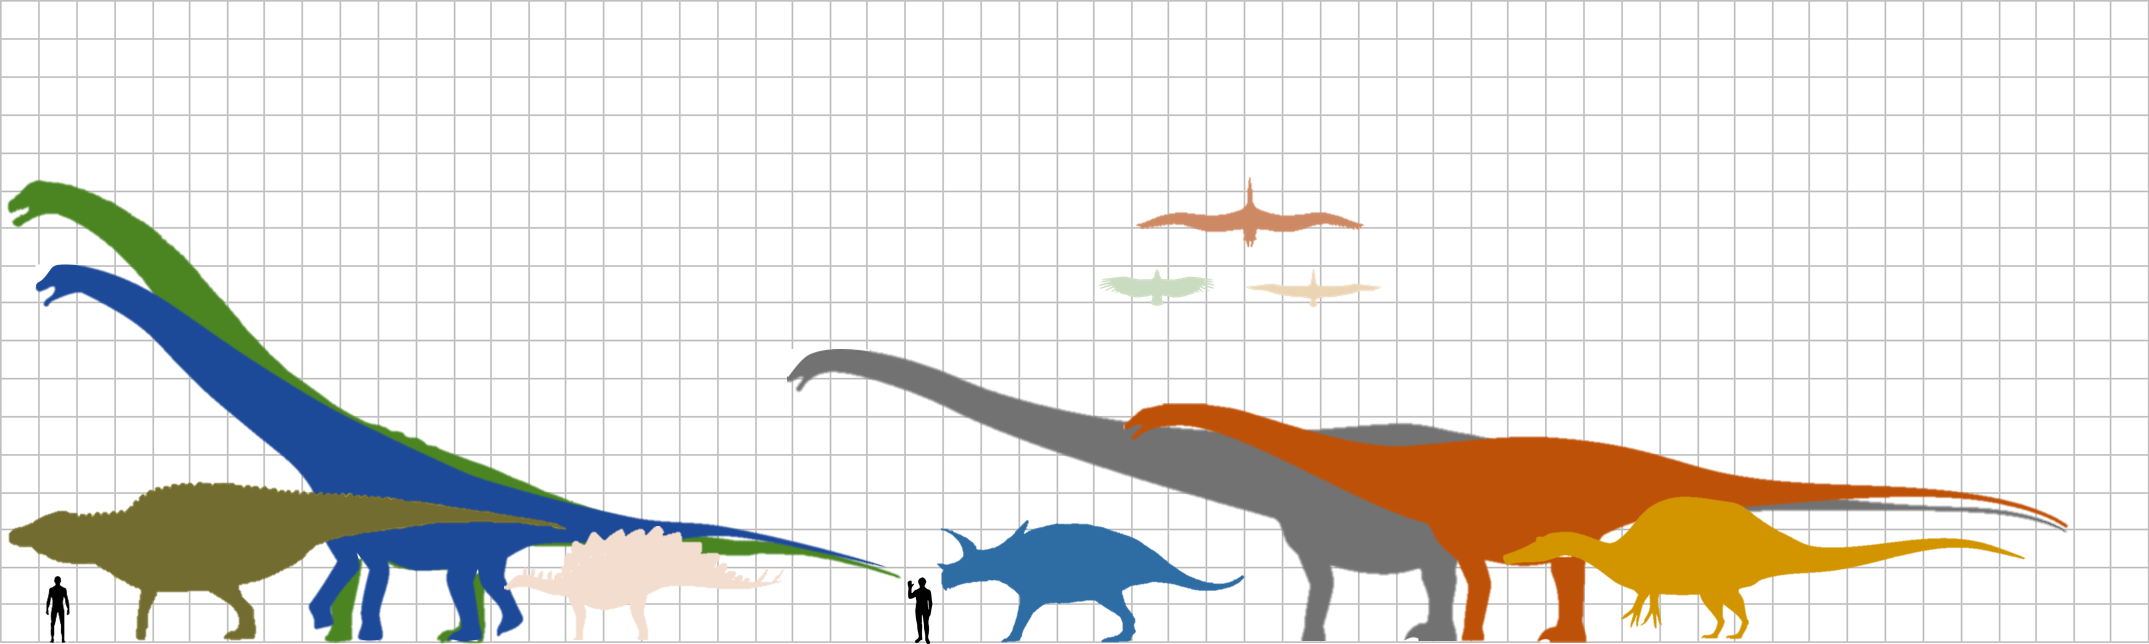 scale of the size of dinosaurs compared to an average human